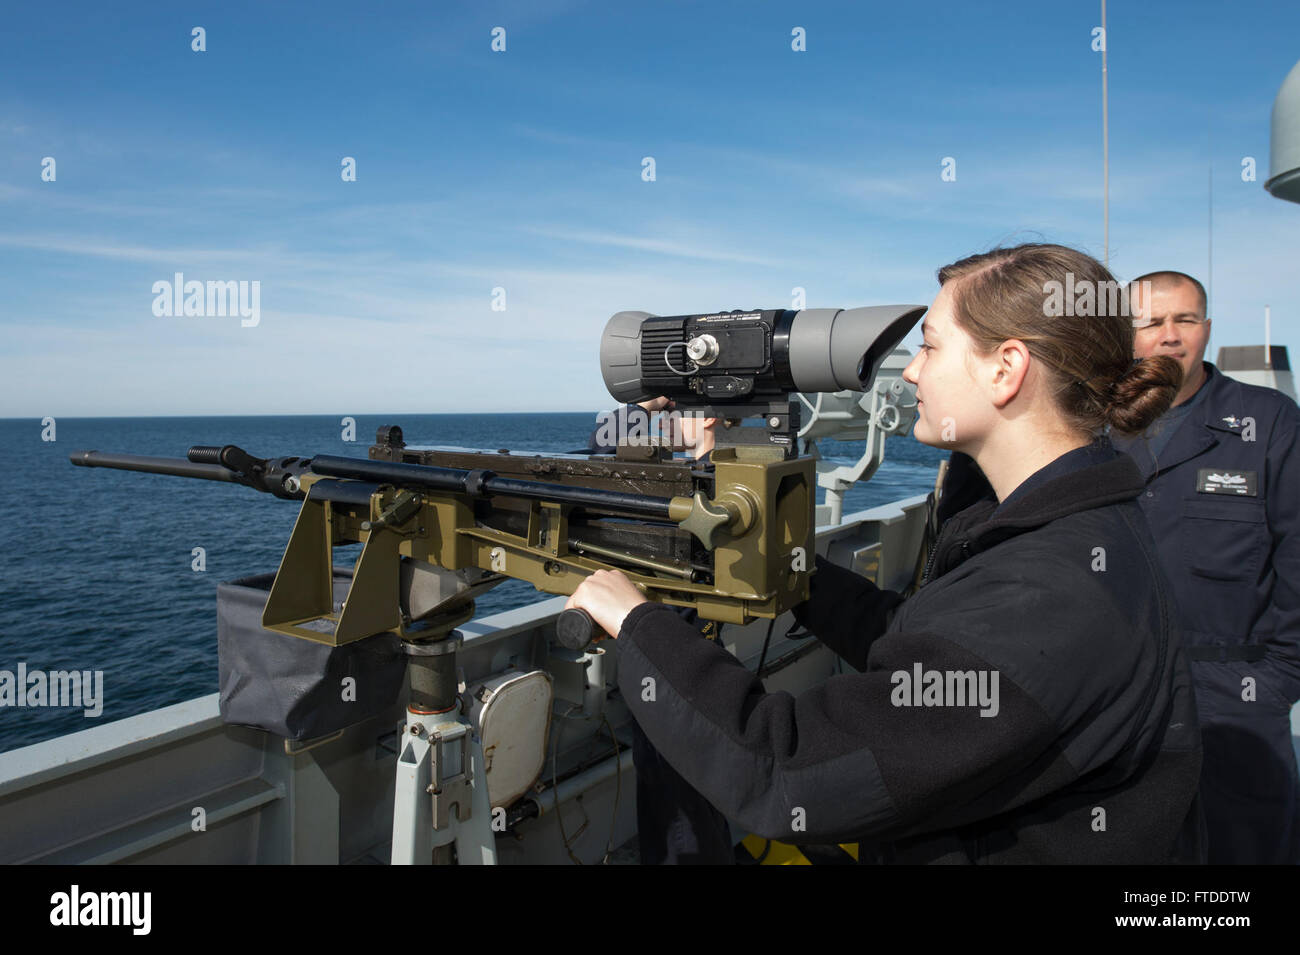 150617-N-ZE250-057 BALTIC SEA (June 17, 2015) Gunner's Mate 2nd Class Allie Enderes, assigned to USS Jason Dunham (DDG 109), looks through the thermal scope on an M2 .50 caliber machinegun during a tour of Danish Navy Frigate HDMS Absalon (L16) June 17, 2015. Jason Dunham, an Arleigh Burke-class guided-missile destroyer homeported in Norfolk, is participating in exercise Baltic Operations (BALTOPS) 2015. BALTOPS is an annually recurring multinational exercise designed to enhance flexibility and interoperability, as well as demonstrate resolve of Allied and partner forces to defend the Baltic r Stock Photo